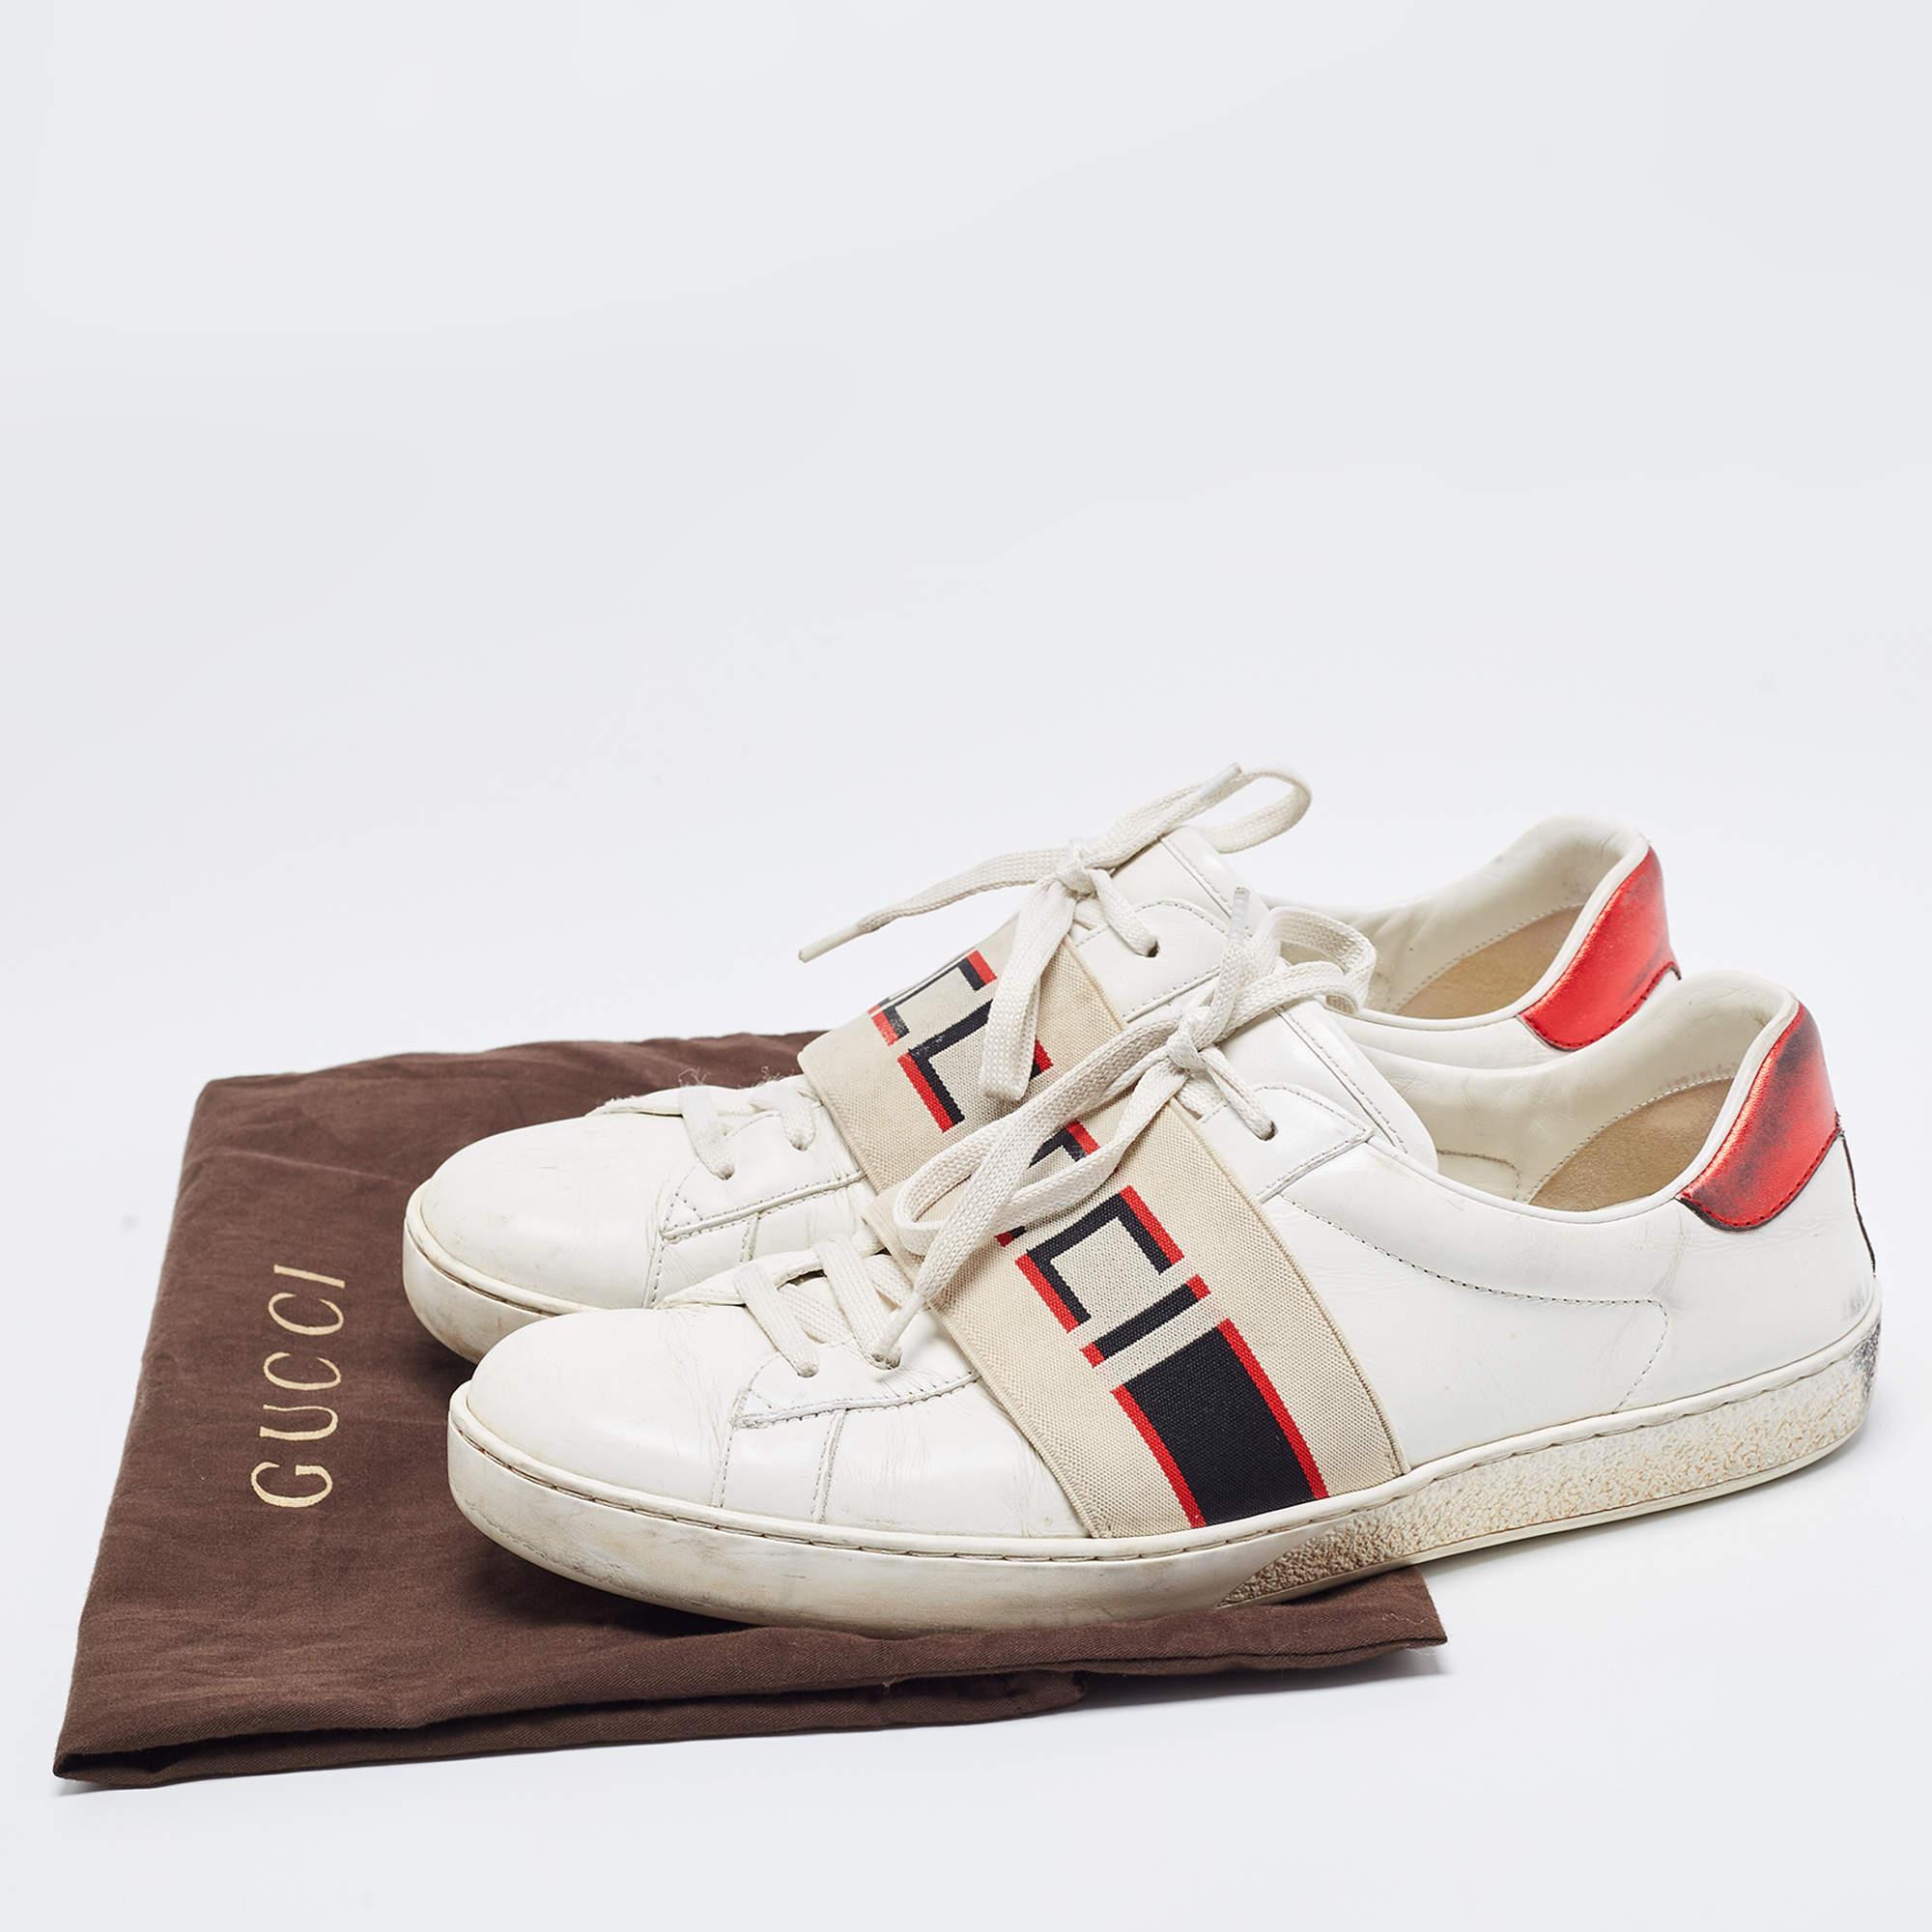 Gucci White Leather Logo Band Ace Sneakers Size 41.5 For Sale 5